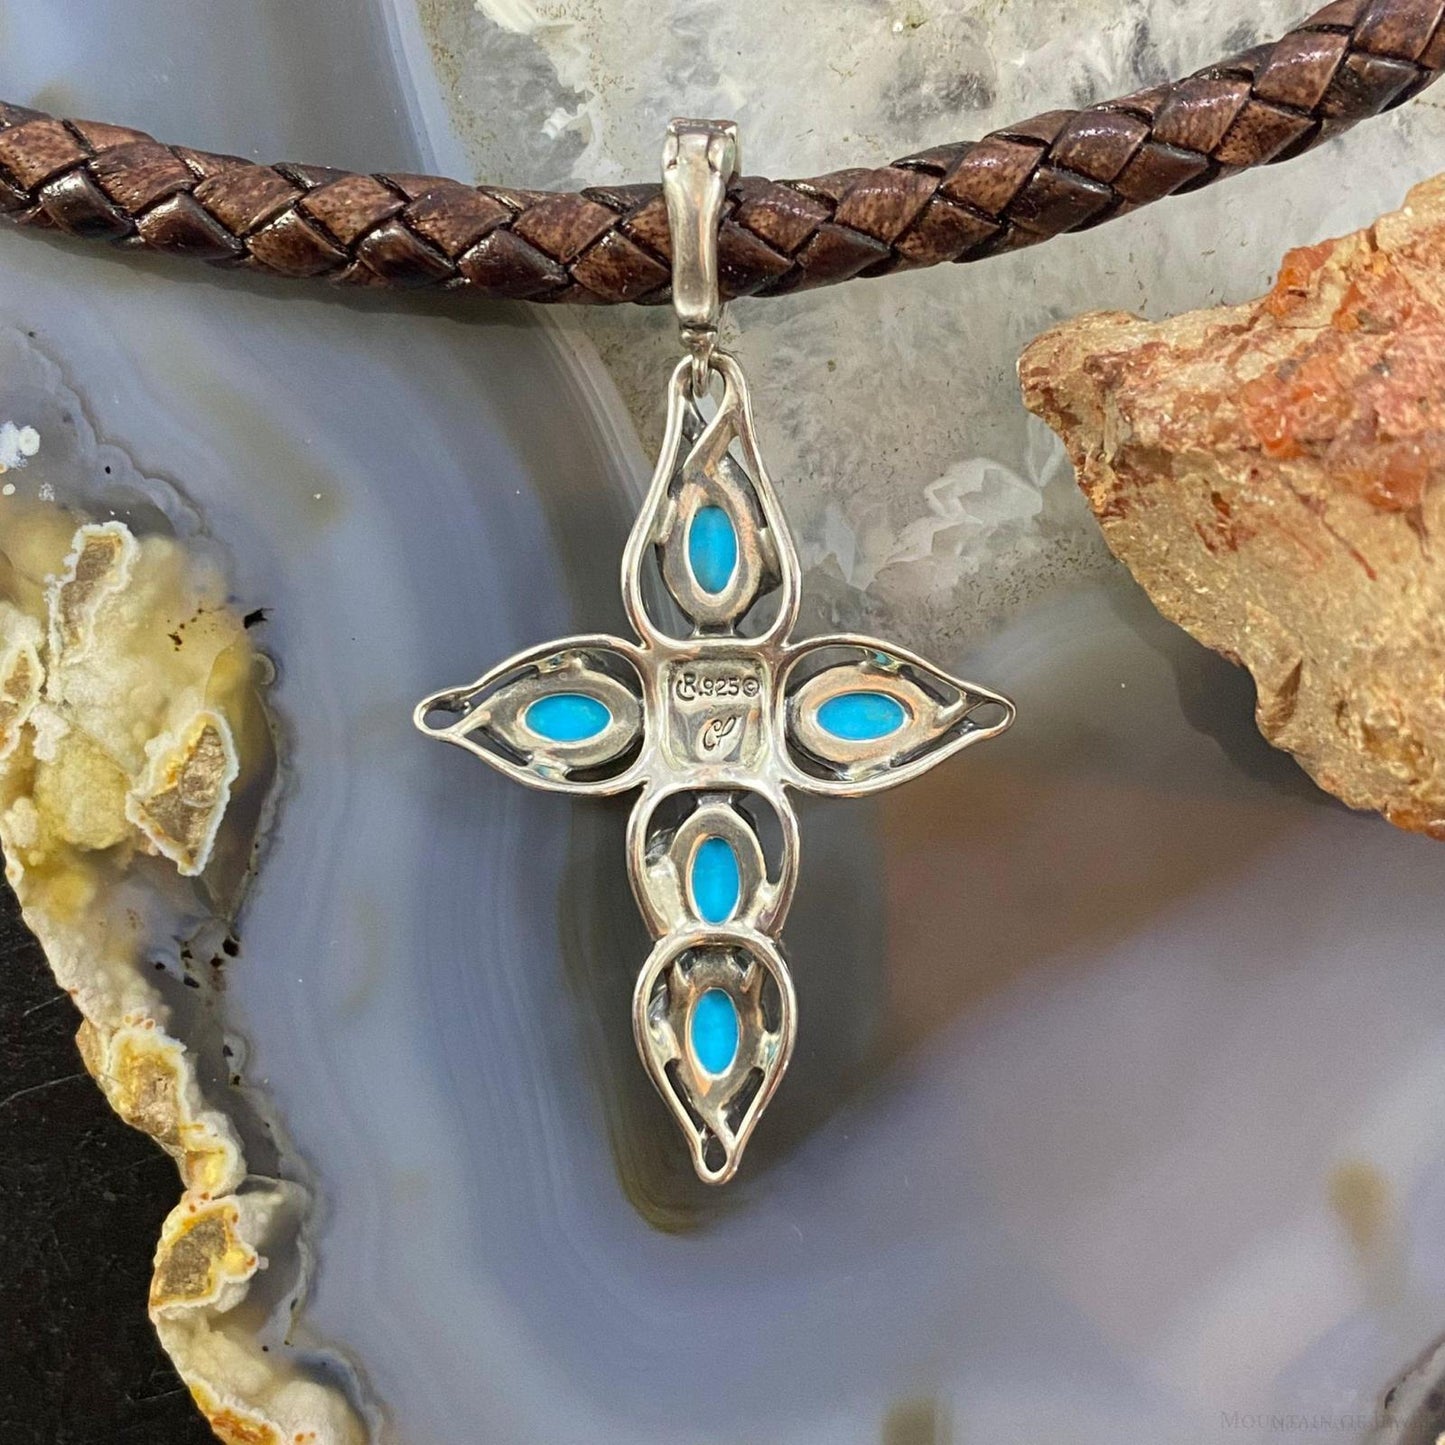 Carolyn Pollack Southwestern Style Sterling Silver Turquoise Decorated Cross Pendant For Women